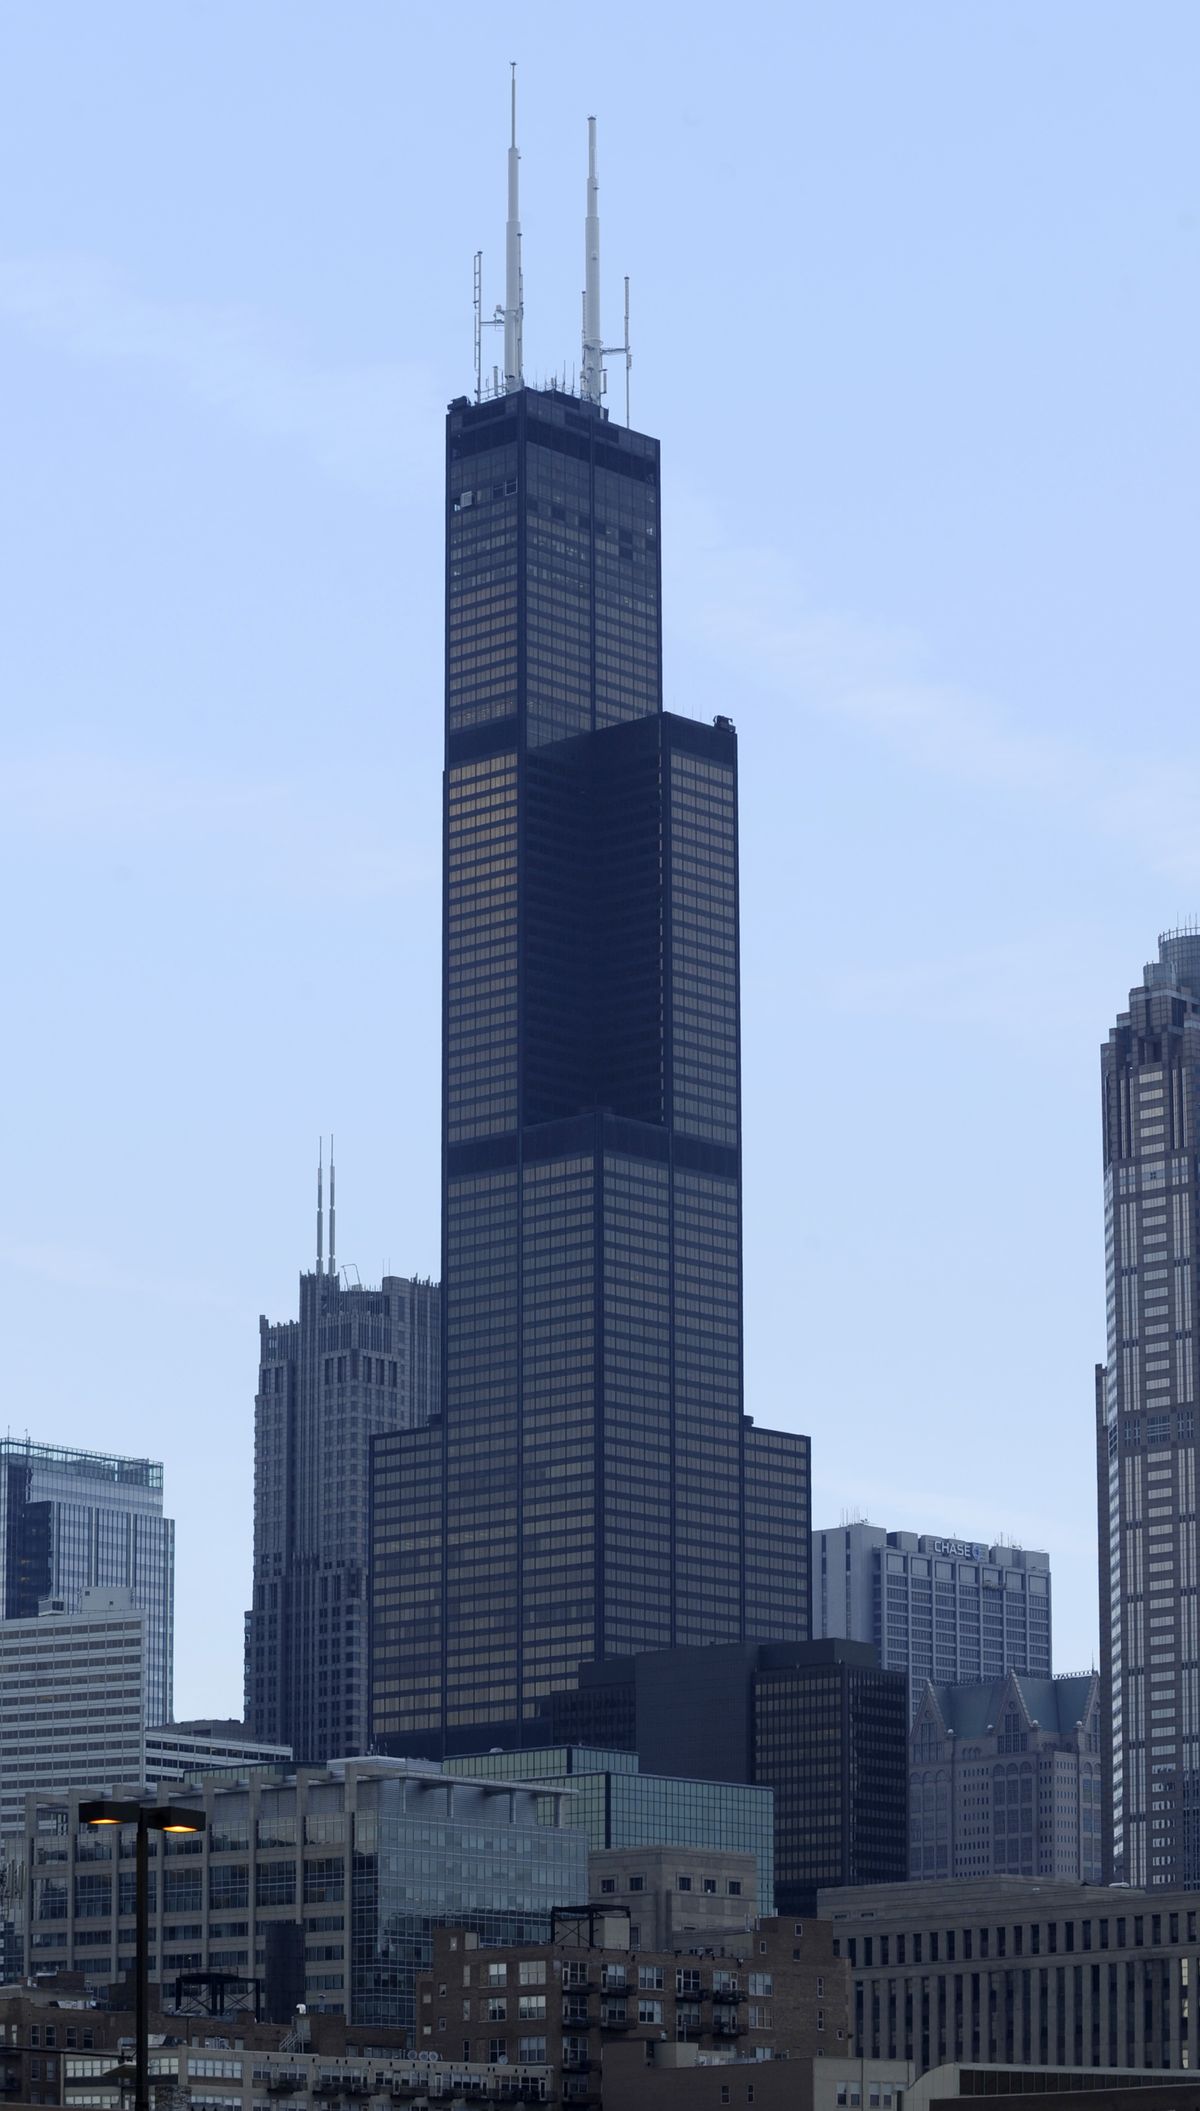 During the remodeling, improvements will be made to the Sears Tower’s windows to save heating energy.  (Associated Press / The Spokesman-Review)